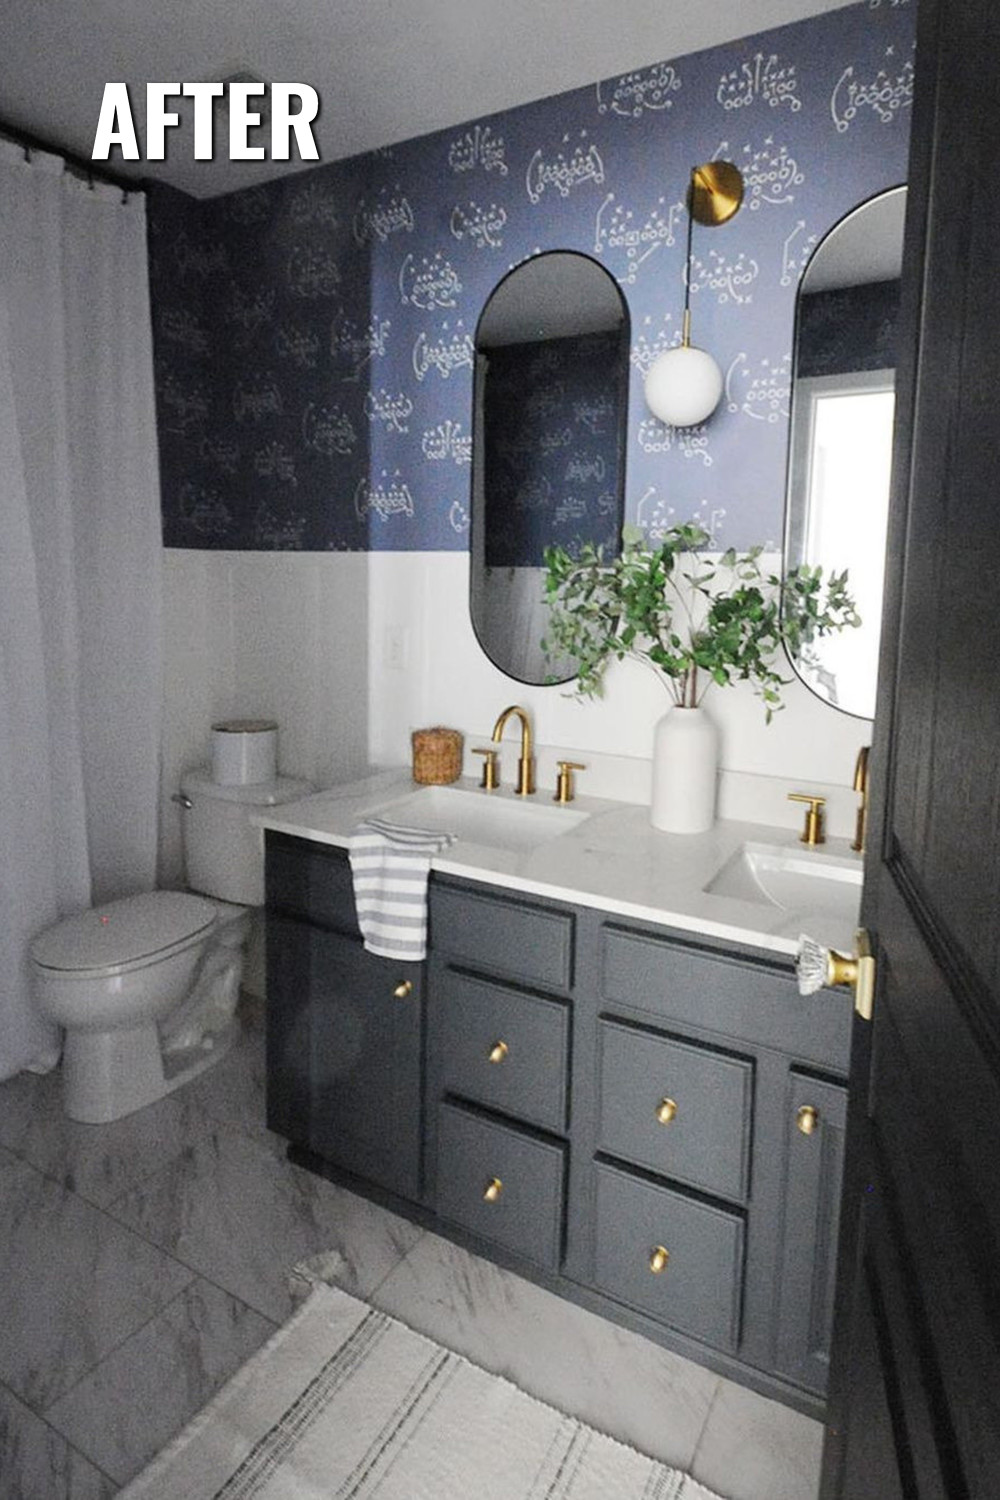 Small Bathroom Remodels - Before, After, Colors & Decorating Ideas (all on a budget!)